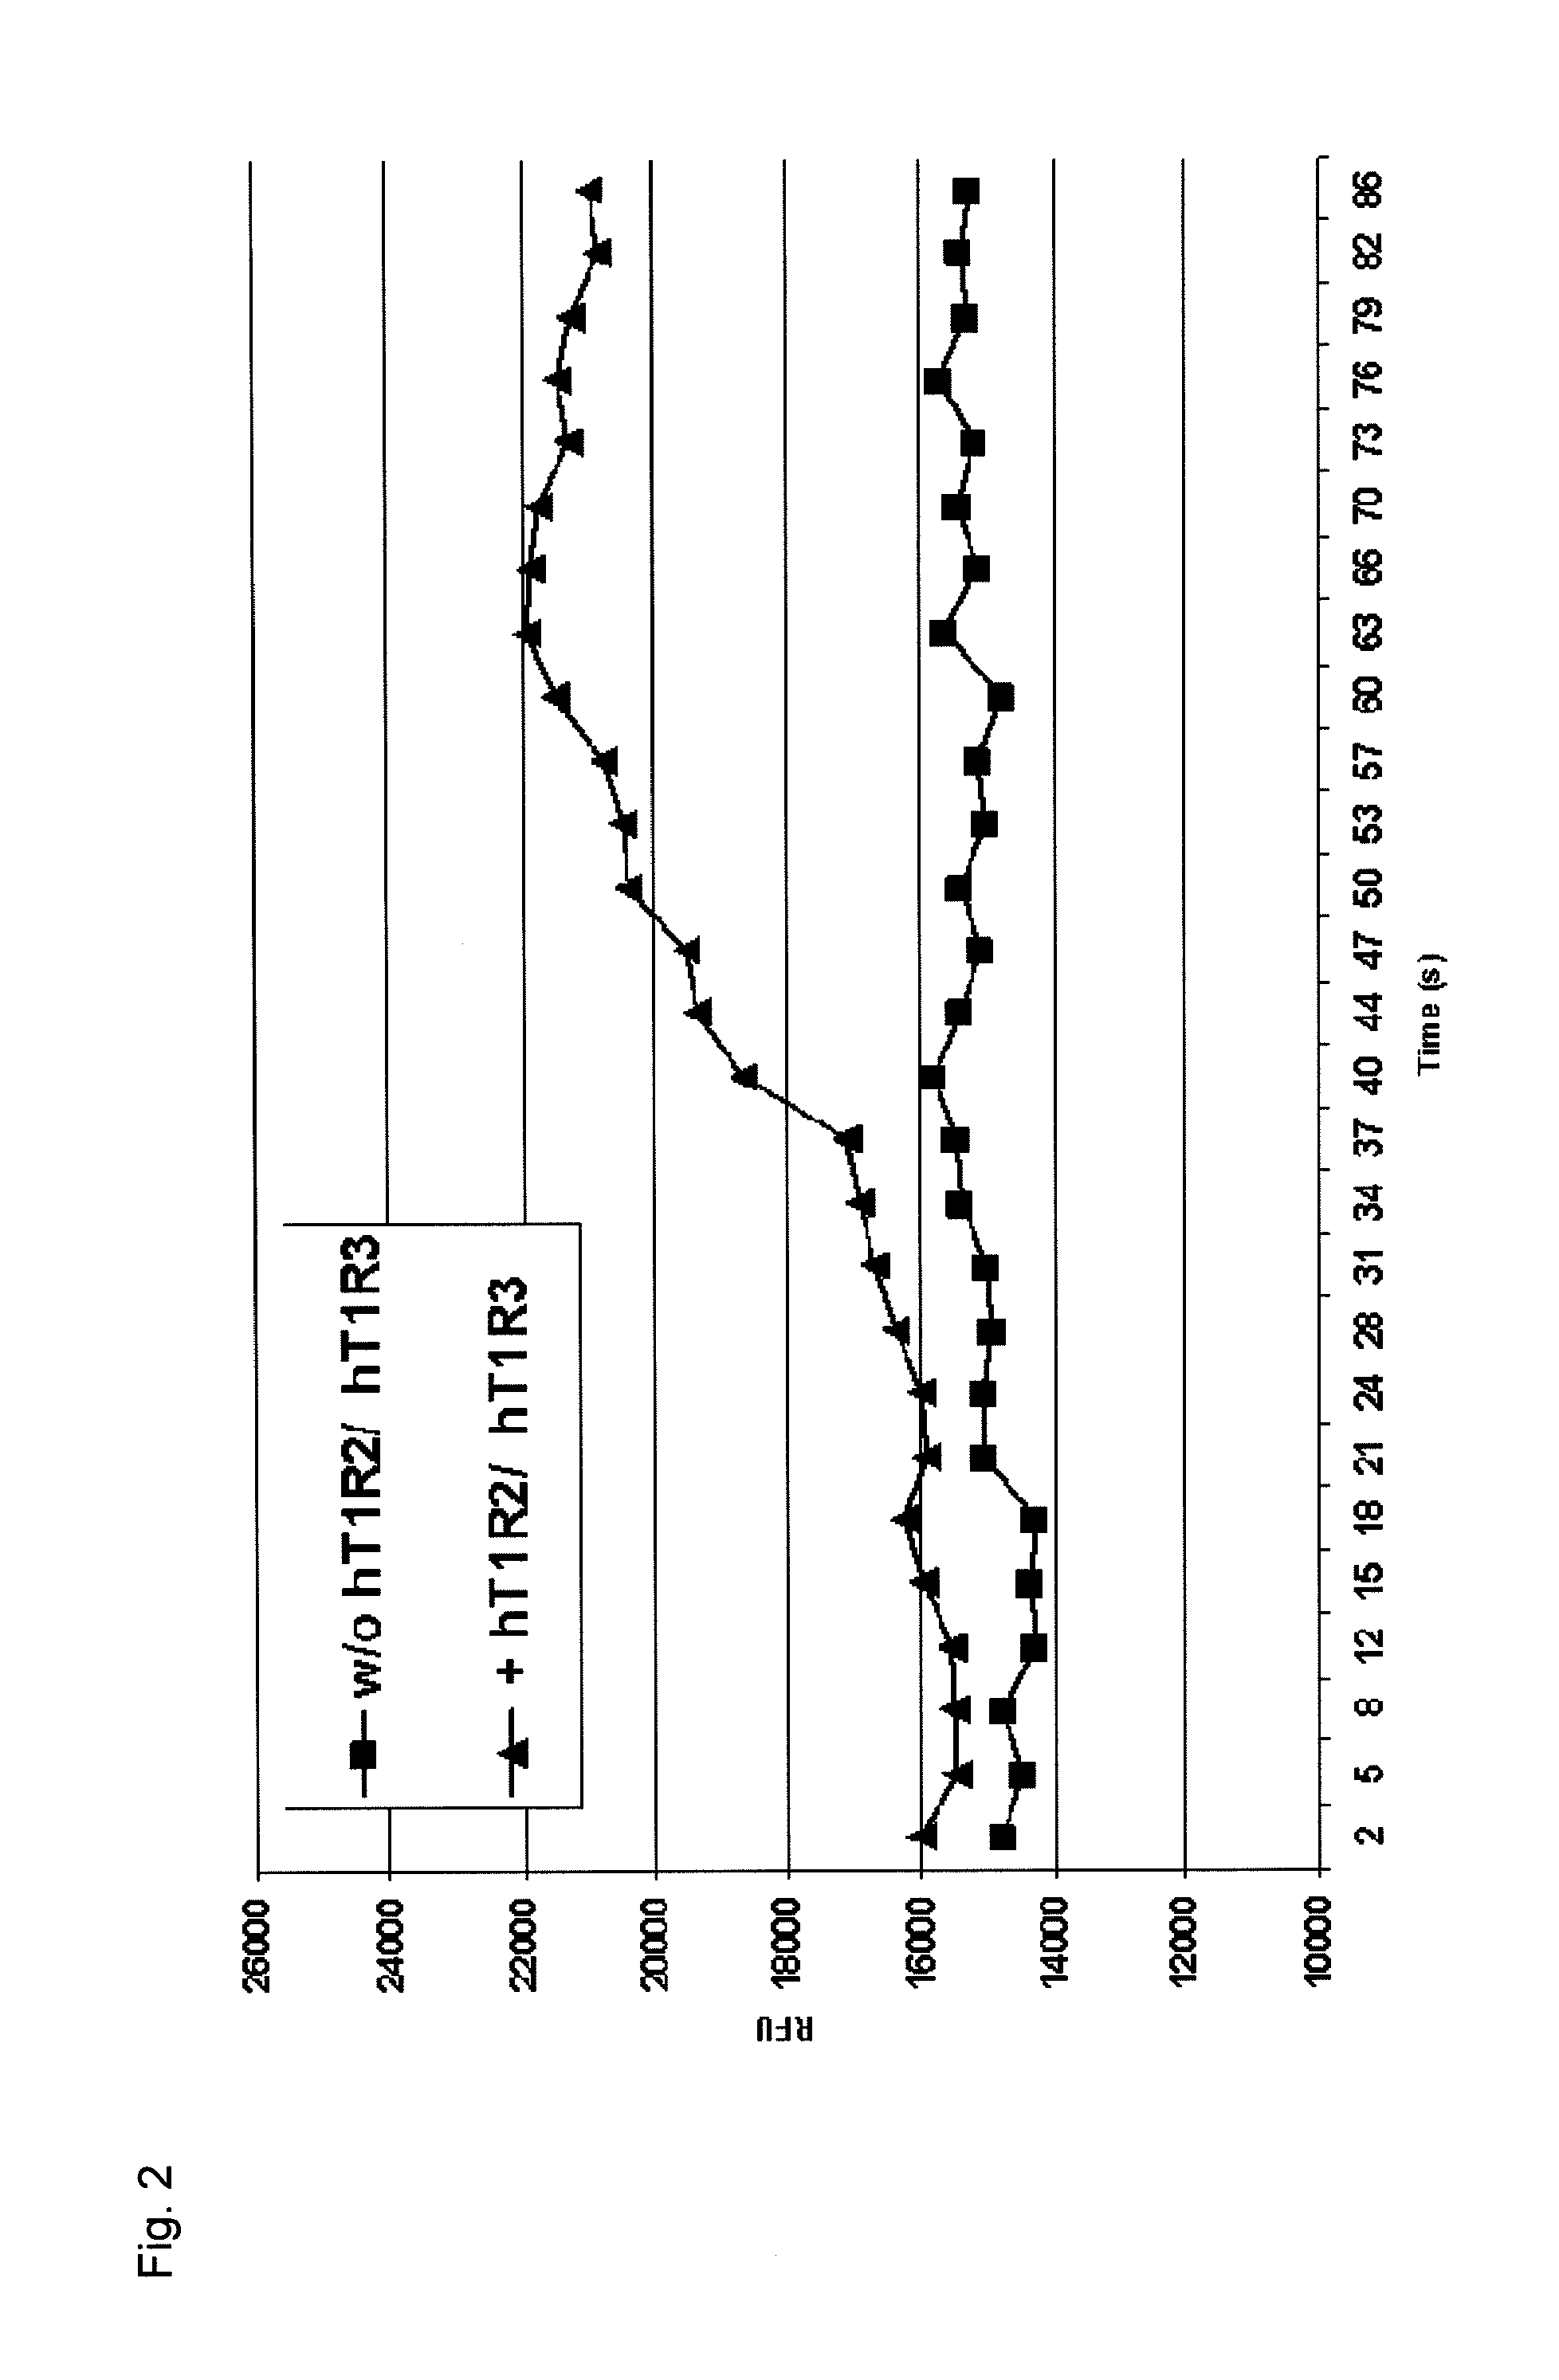 Sweetness enhancer, sweetener compositions, methods of making the same and consumables containing the same